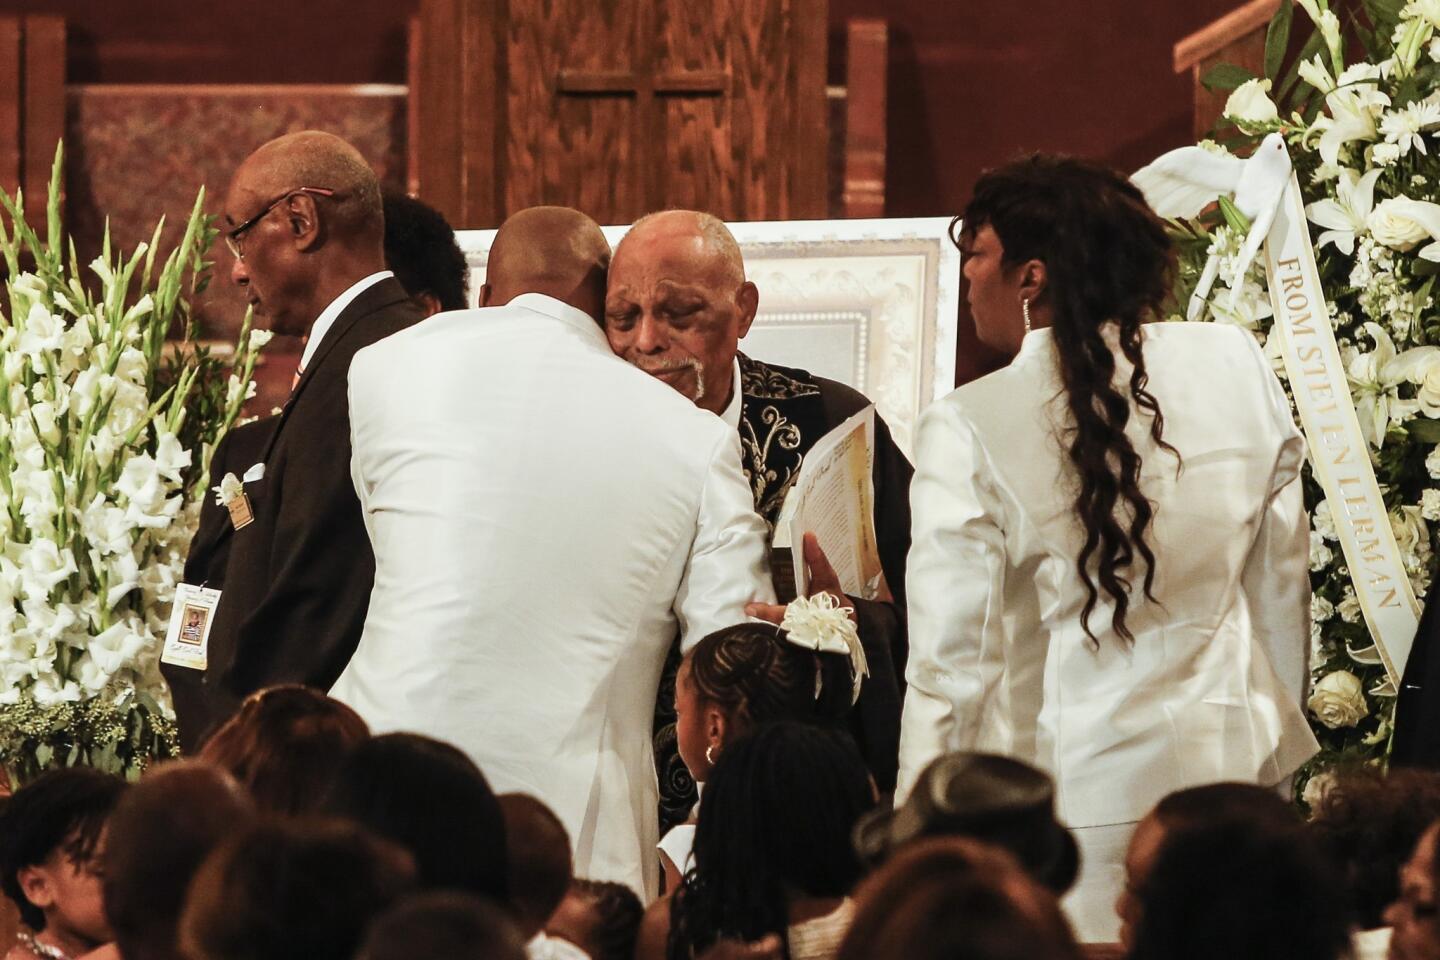 The Rev. Cecil "Chip" Murray, pastor emeritus at First African Methodist Episcopal Church, center, greets Edsell, left, and Tritobia Ford at the conclusion of the service.